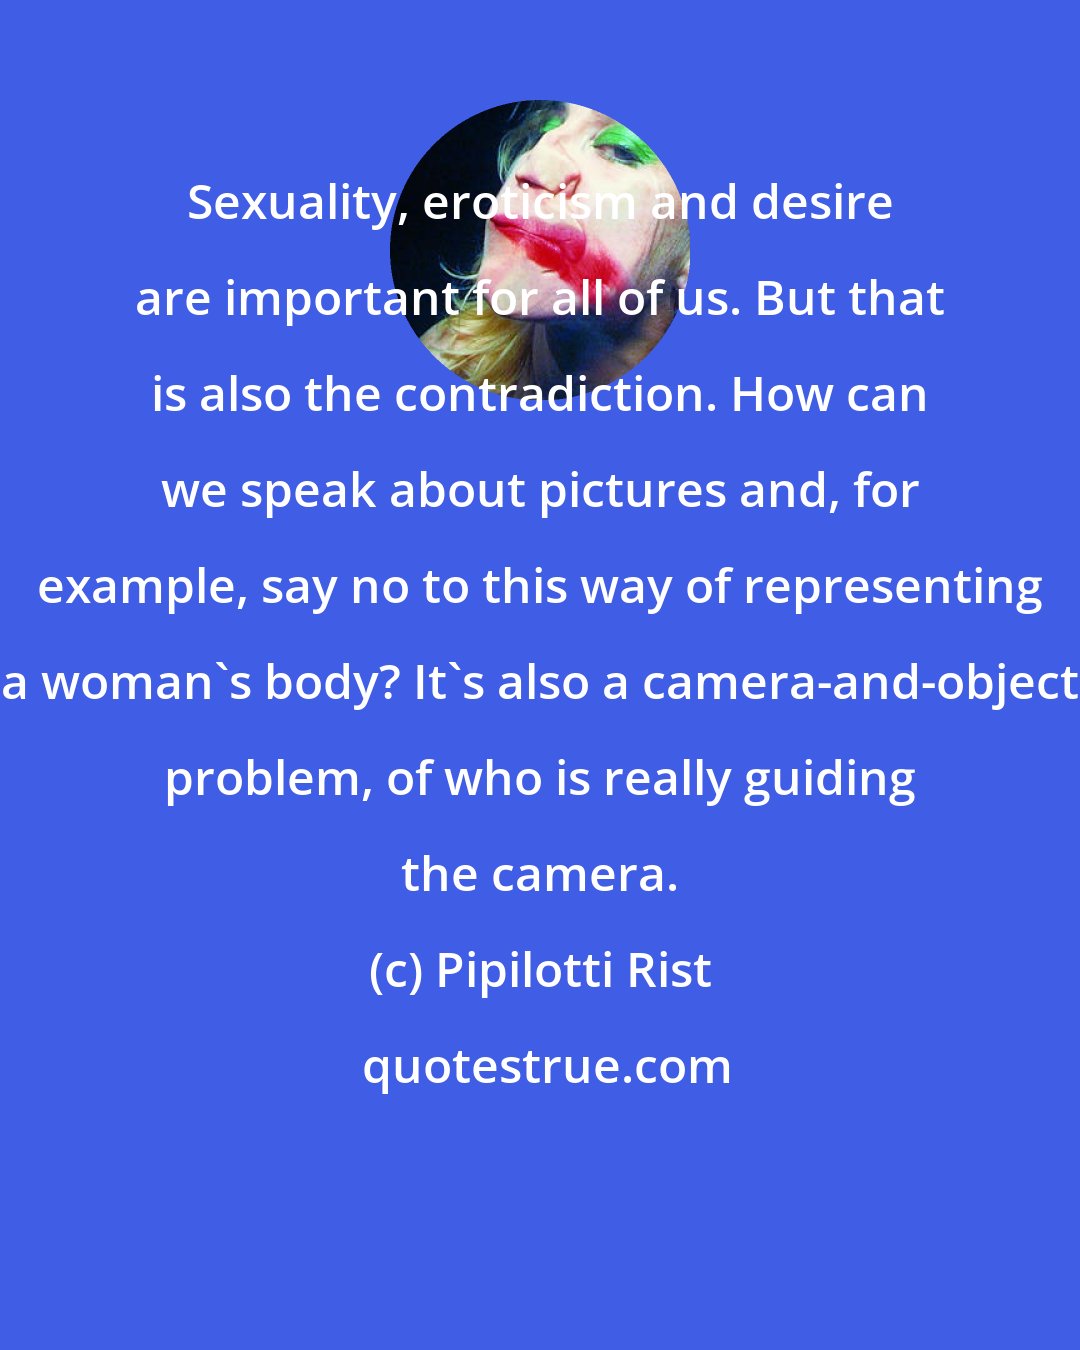 Pipilotti Rist: Sexuality, eroticism and desire are important for all of us. But that is also the contradiction. How can we speak about pictures and, for example, say no to this way of representing a woman's body? It's also a camera-and-object problem, of who is really guiding the camera.